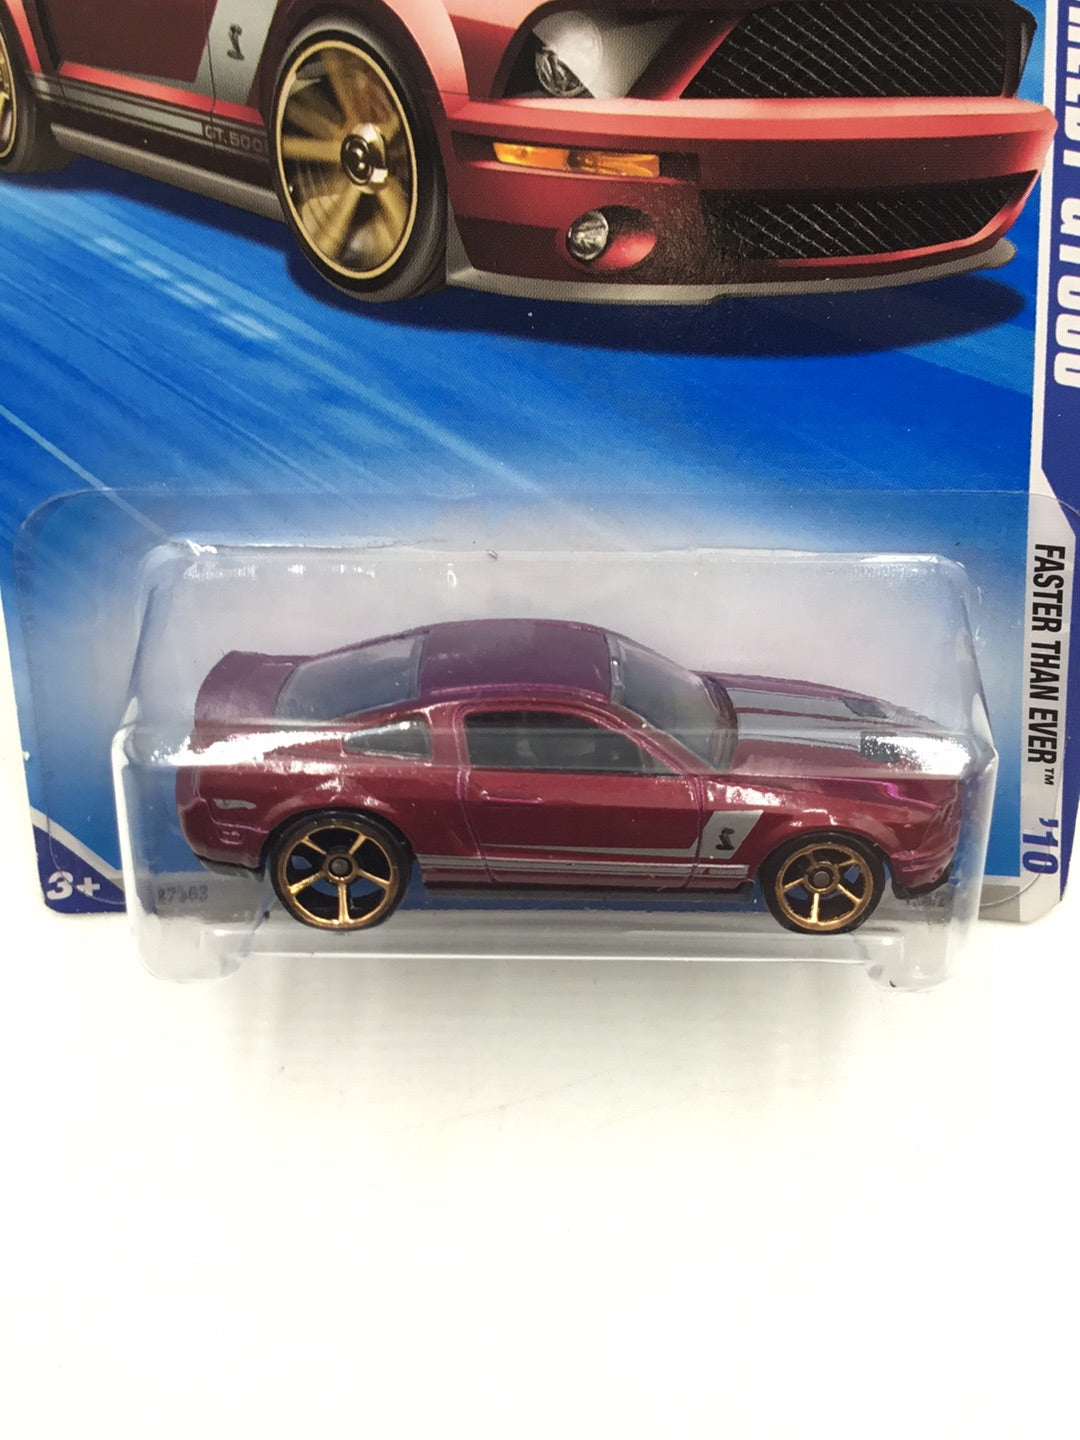 2010 Hot Wheels #136 2007 Ford Shelby Gt500 JJ7